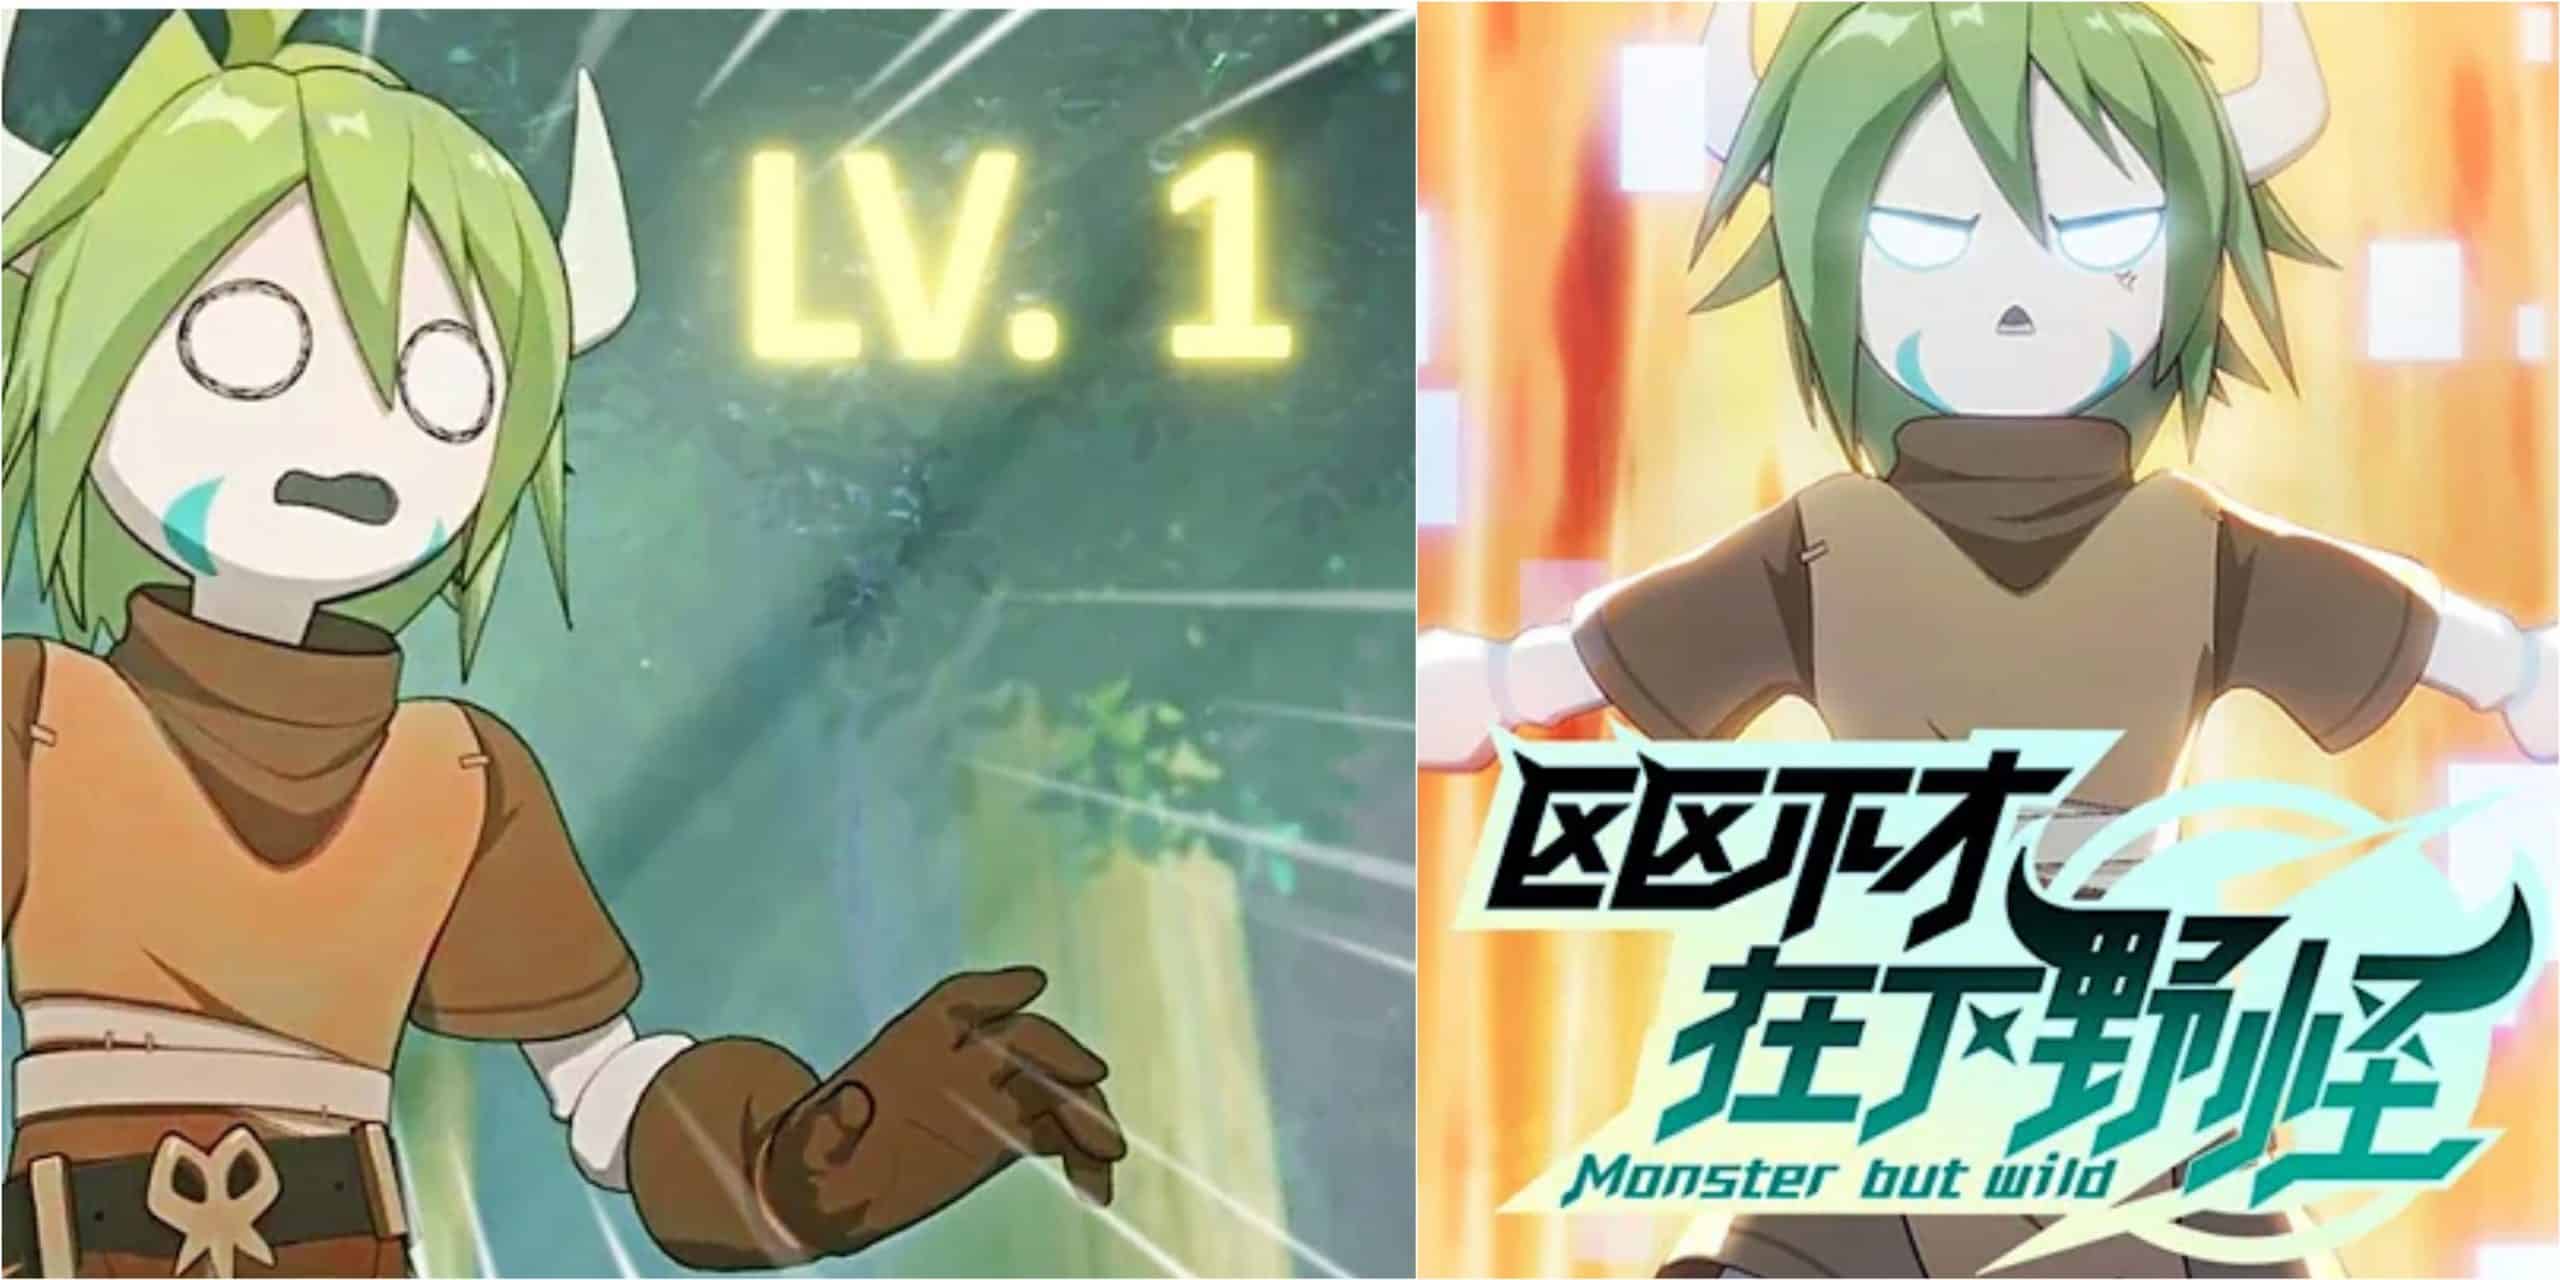 Monster But Wild Chinese Action Anime Episode 9 Synopsis 